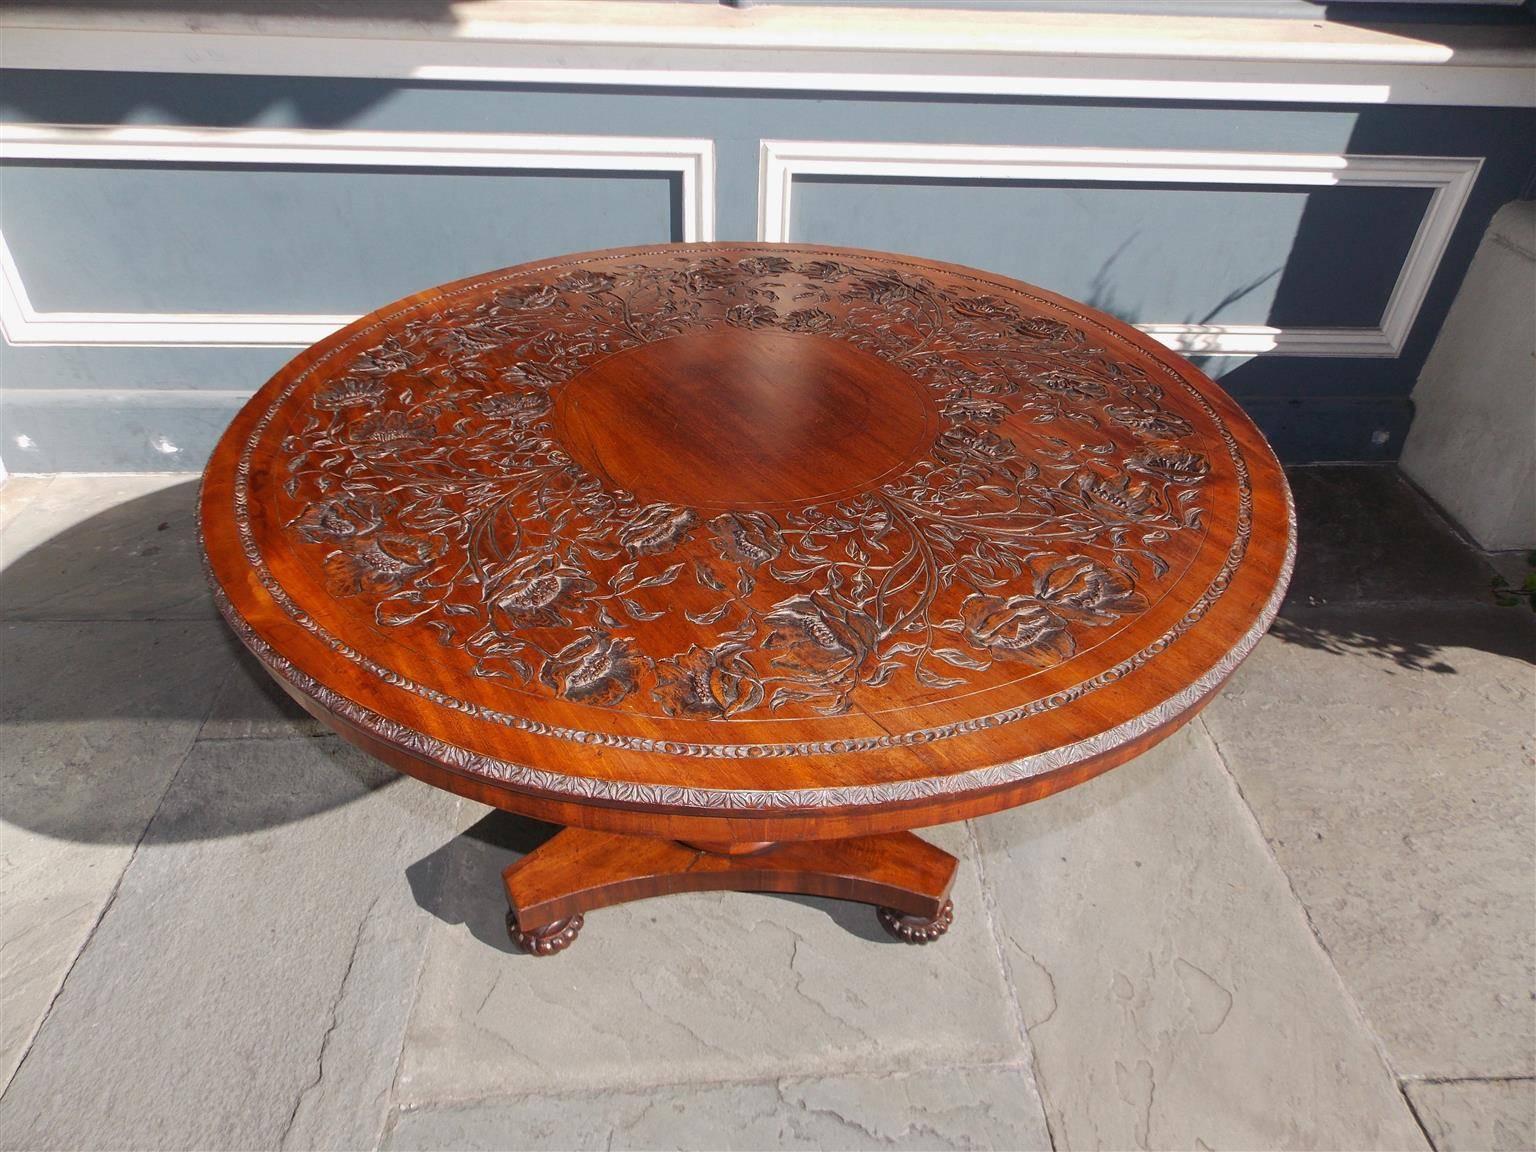 English mahogany center table with a decorative carved hibiscus floral top, spiral bulbous filigree carved pedestal and terminating on a tripod base with the original melon feet, Early 19th Century.